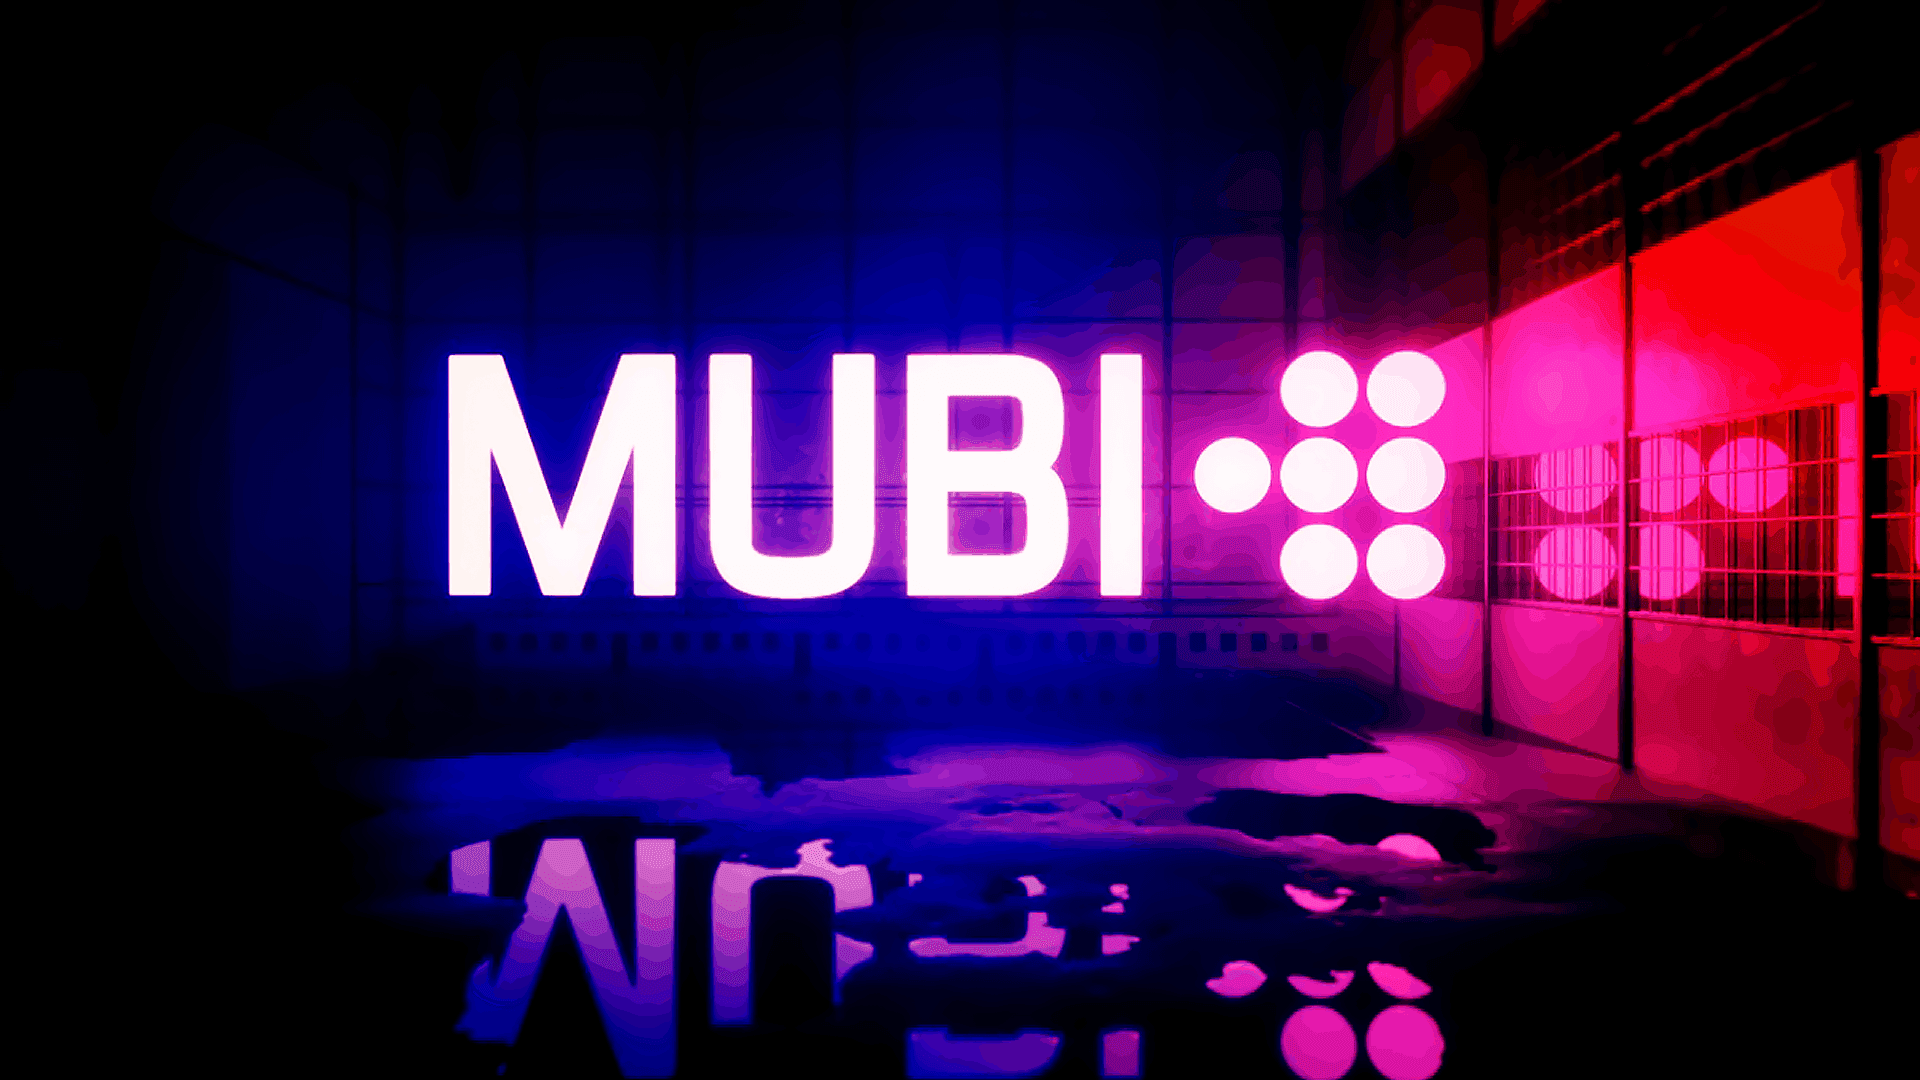 You can also get MUBI as part of a Prime Video Channel